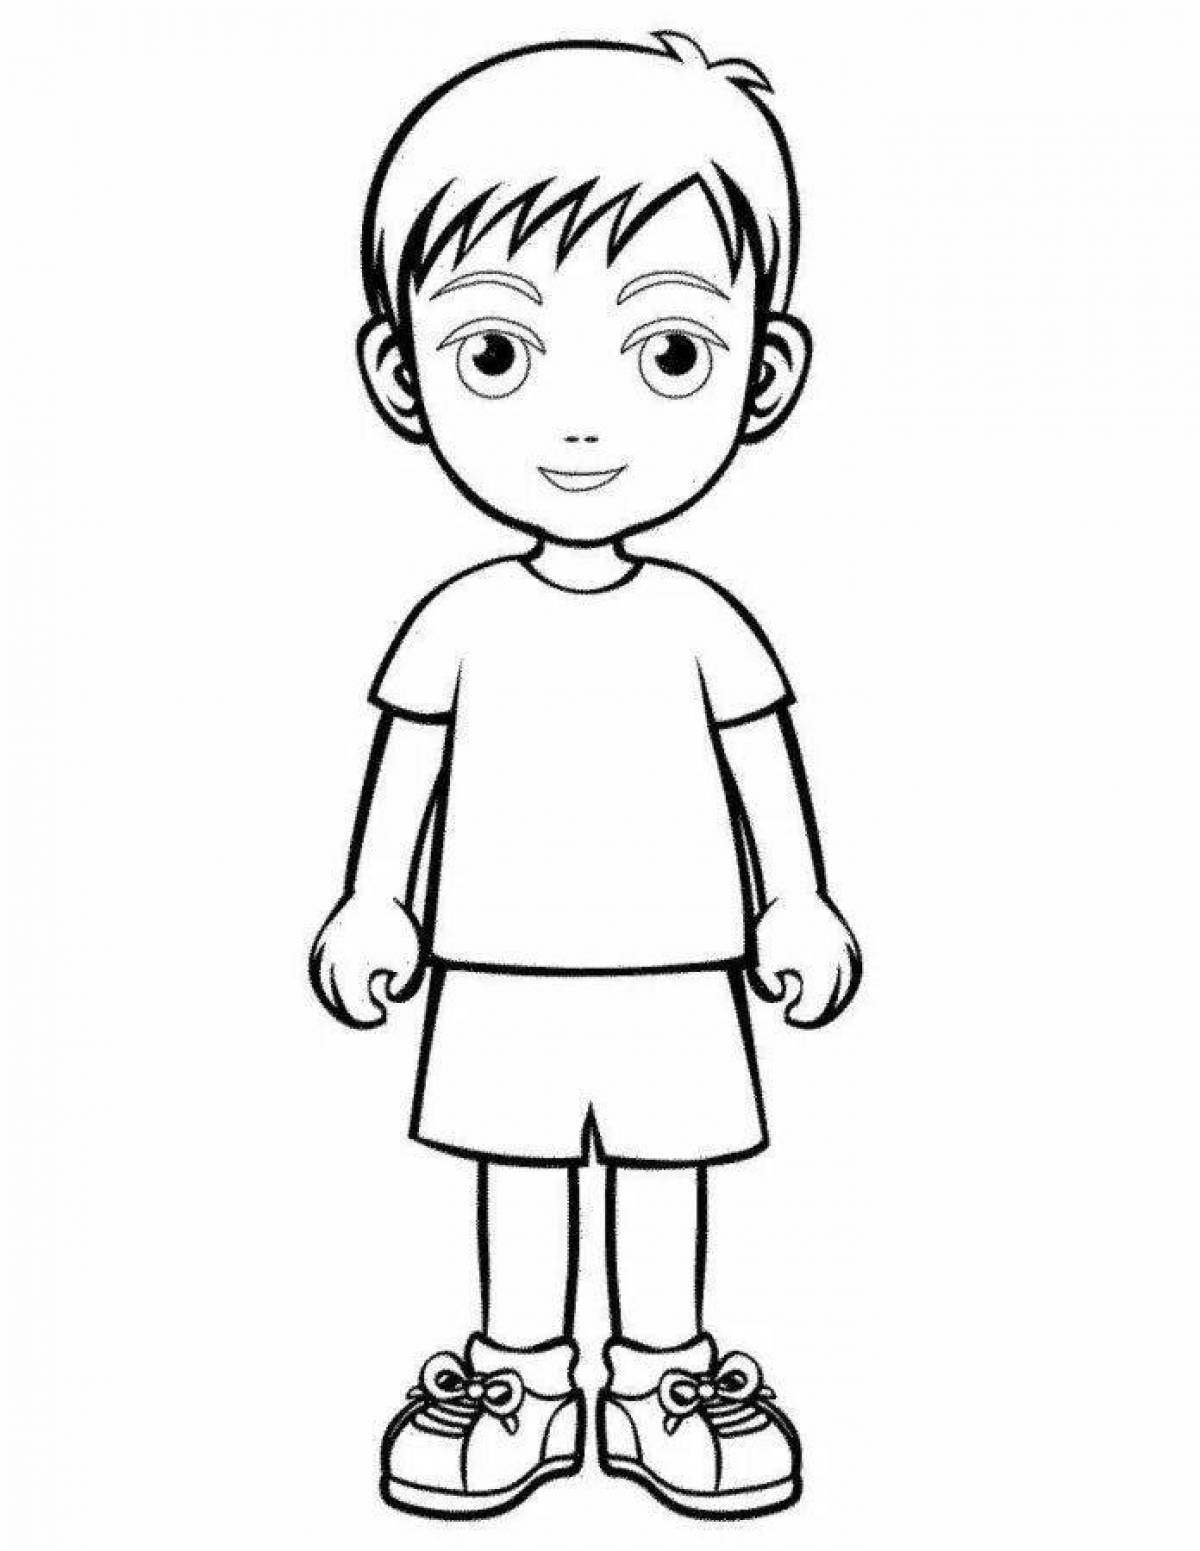 Color-funny coloring page person for 3-4 year olds